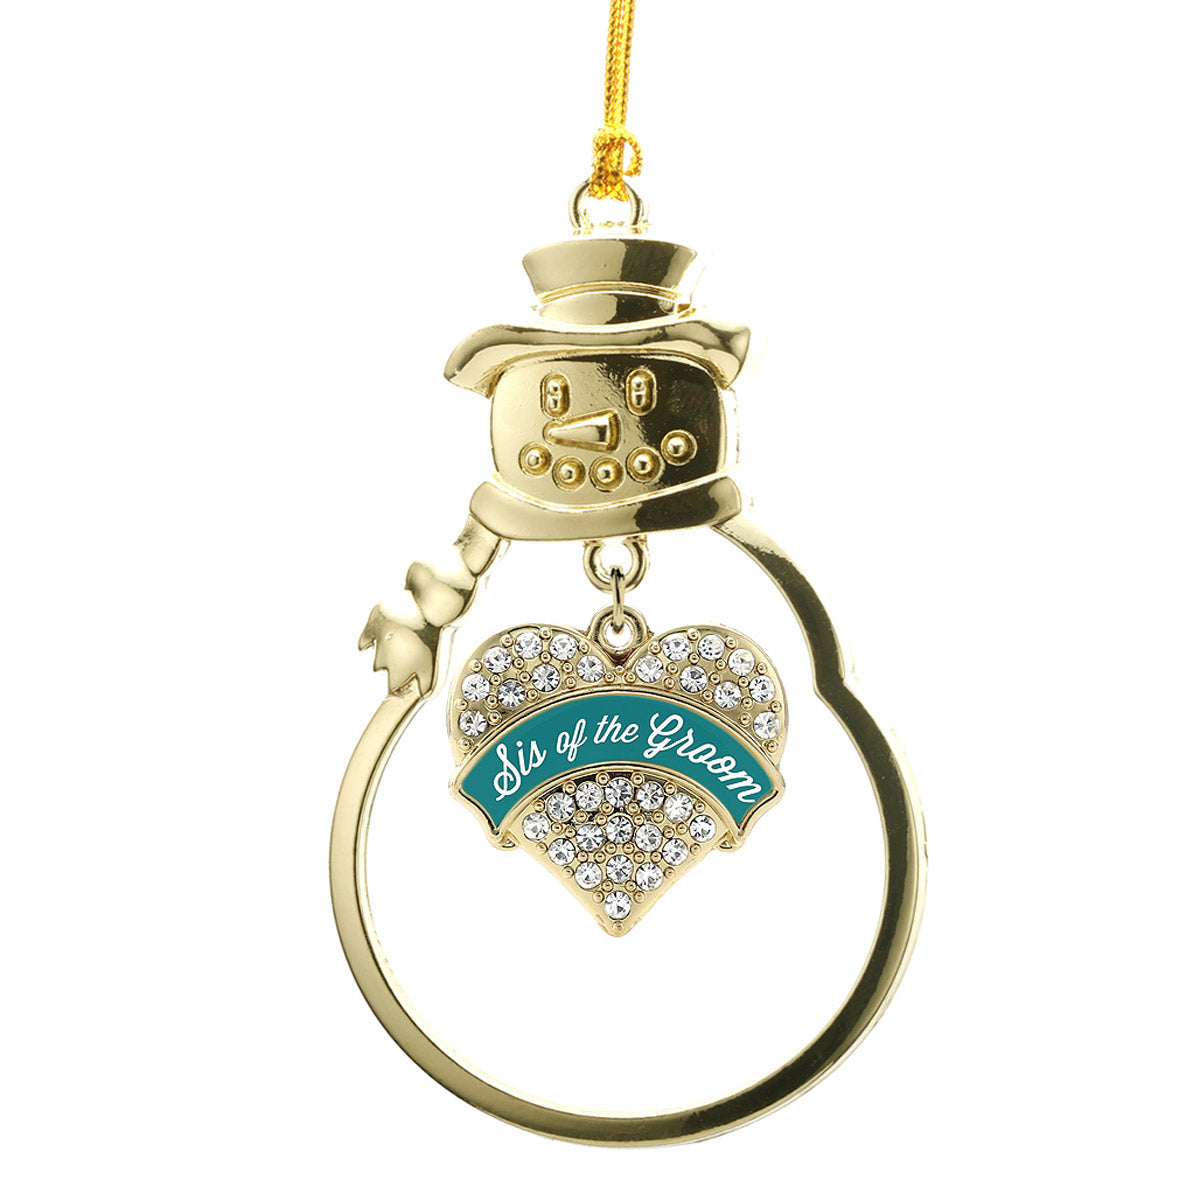 Gold Dark Teal Sis of Groom Pave Heart Charm Snowman Ornament